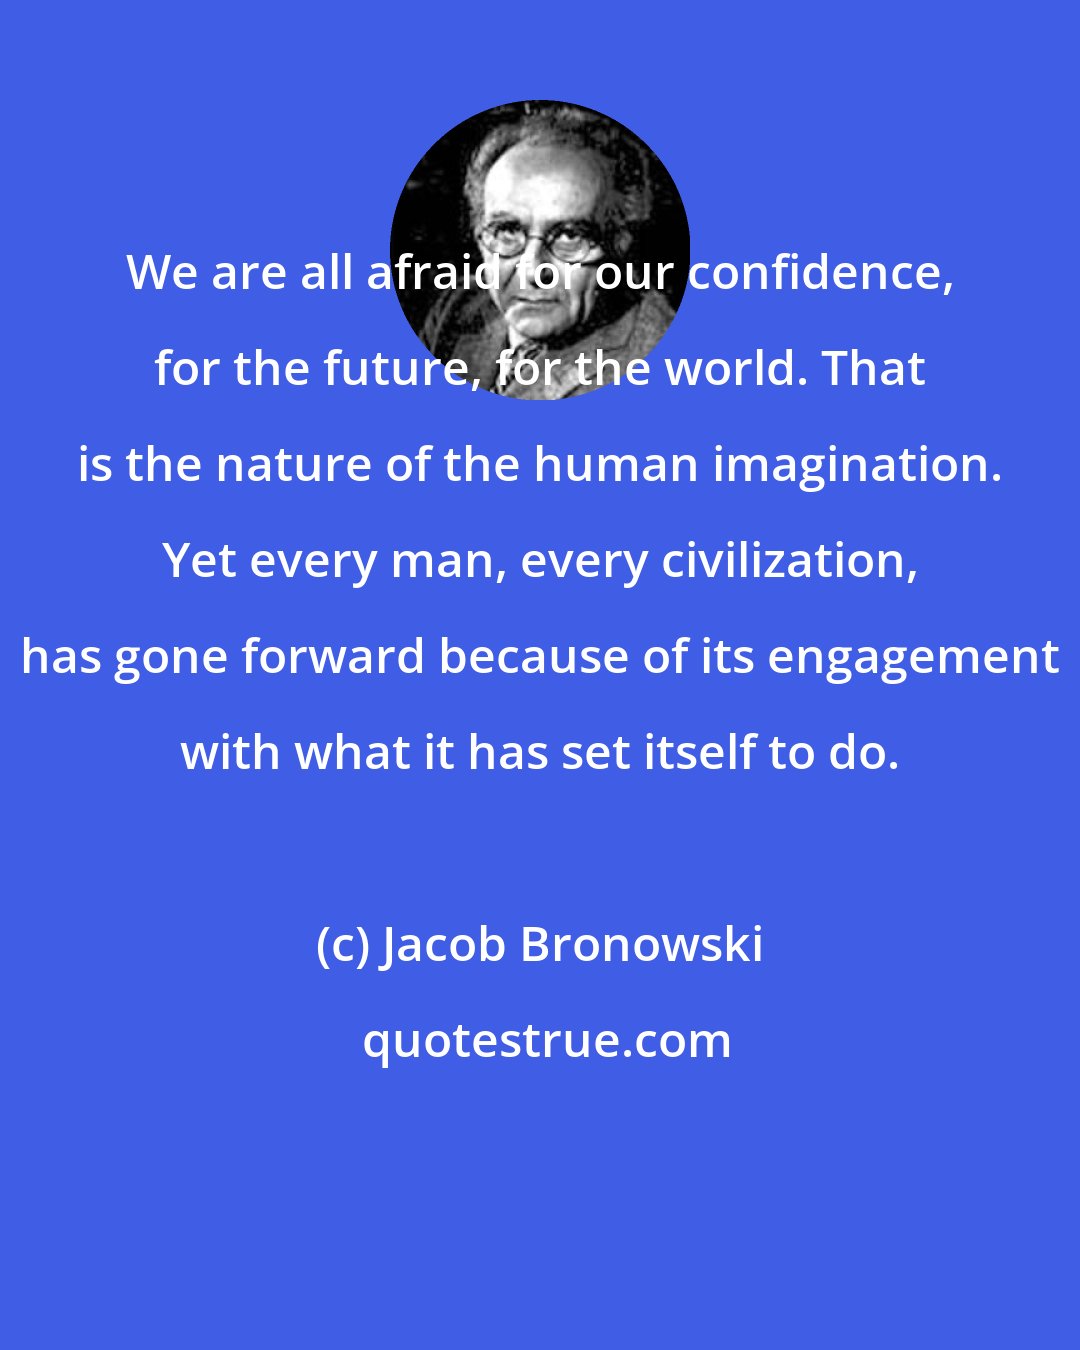 Jacob Bronowski: We are all afraid for our confidence, for the future, for the world. That is the nature of the human imagination. Yet every man, every civilization, has gone forward because of its engagement with what it has set itself to do.